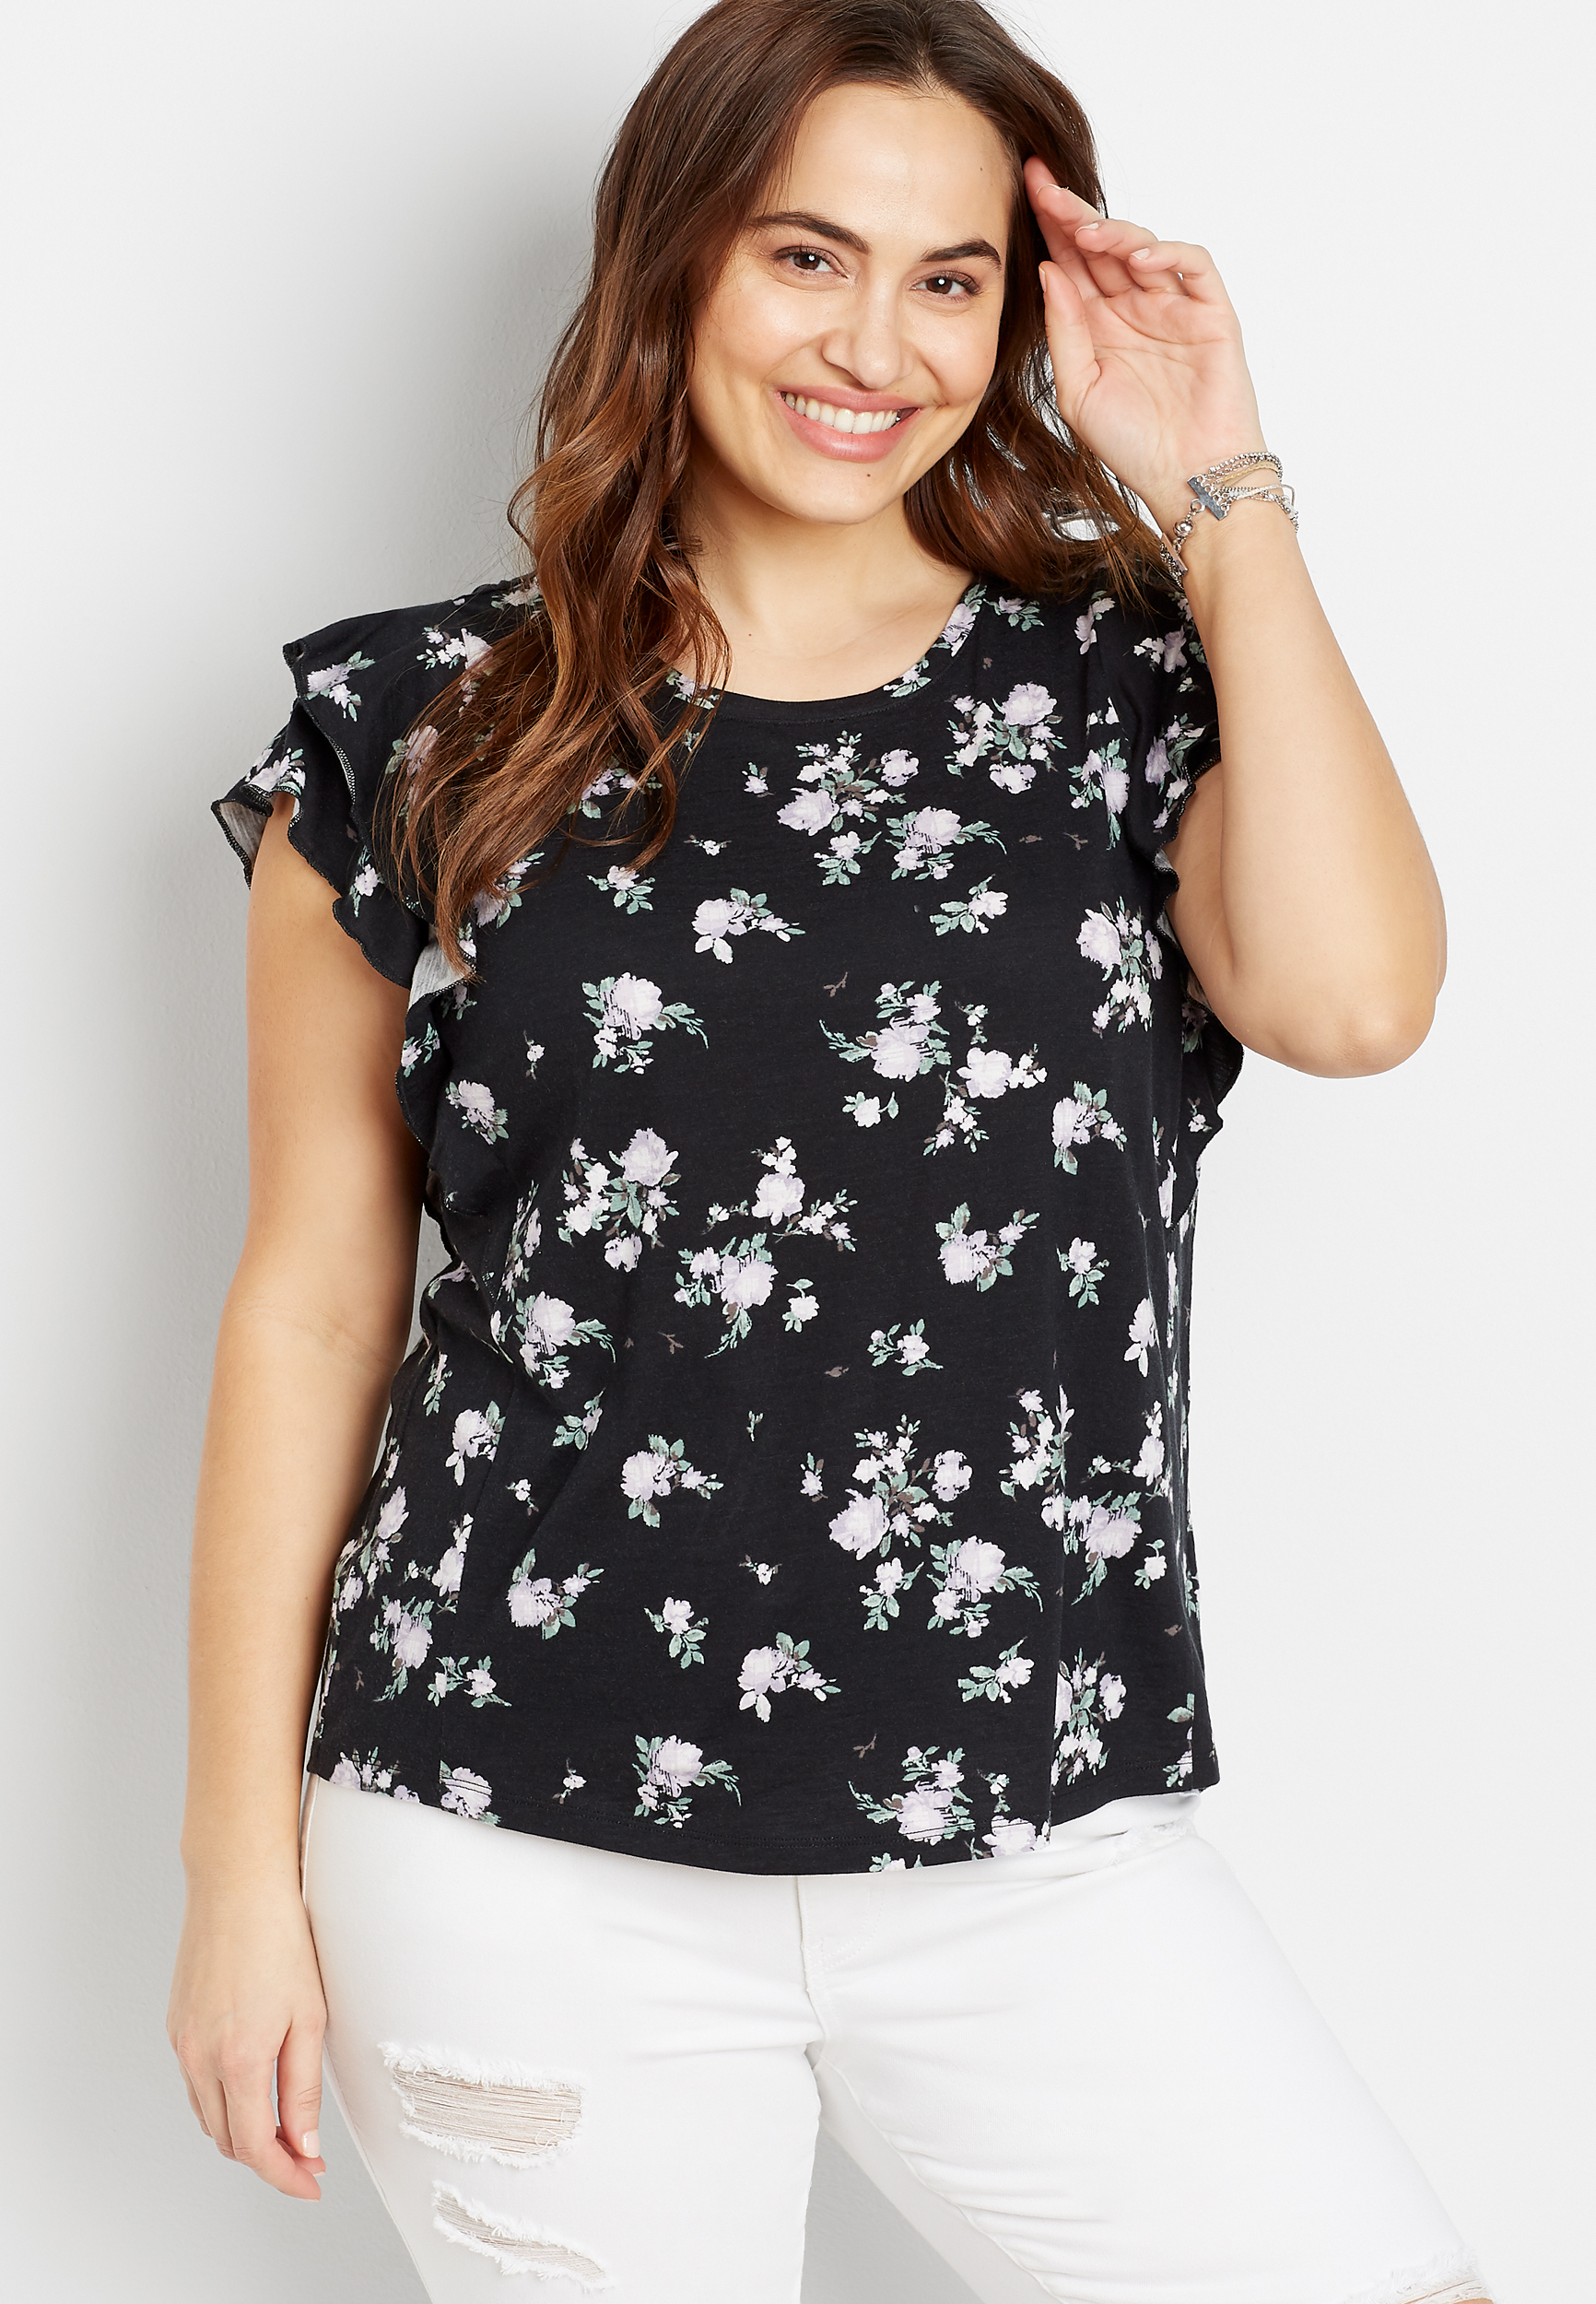 Plus Size 24/7 Black Floral Ruffle Sleeve Tee | maurices